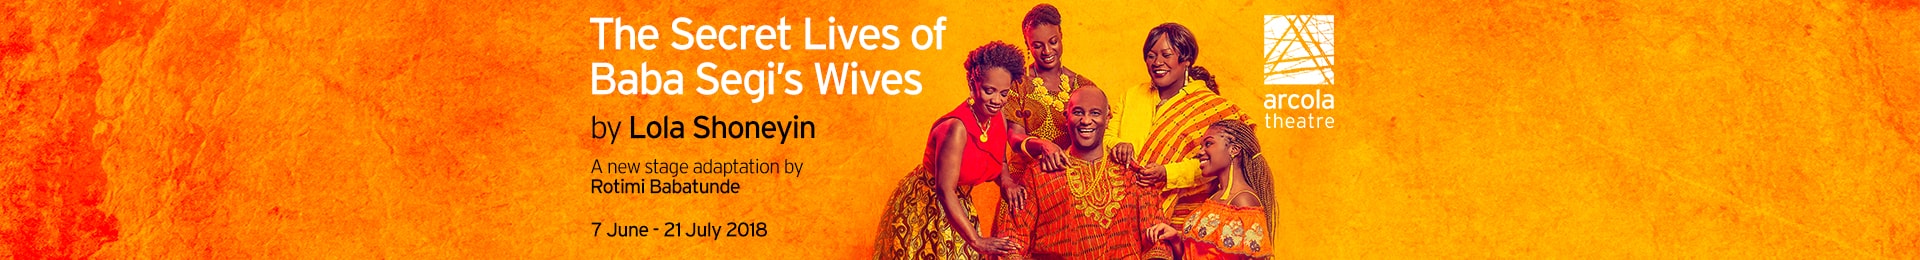 The Secret Lives of Baba Segi’s Wives tickets